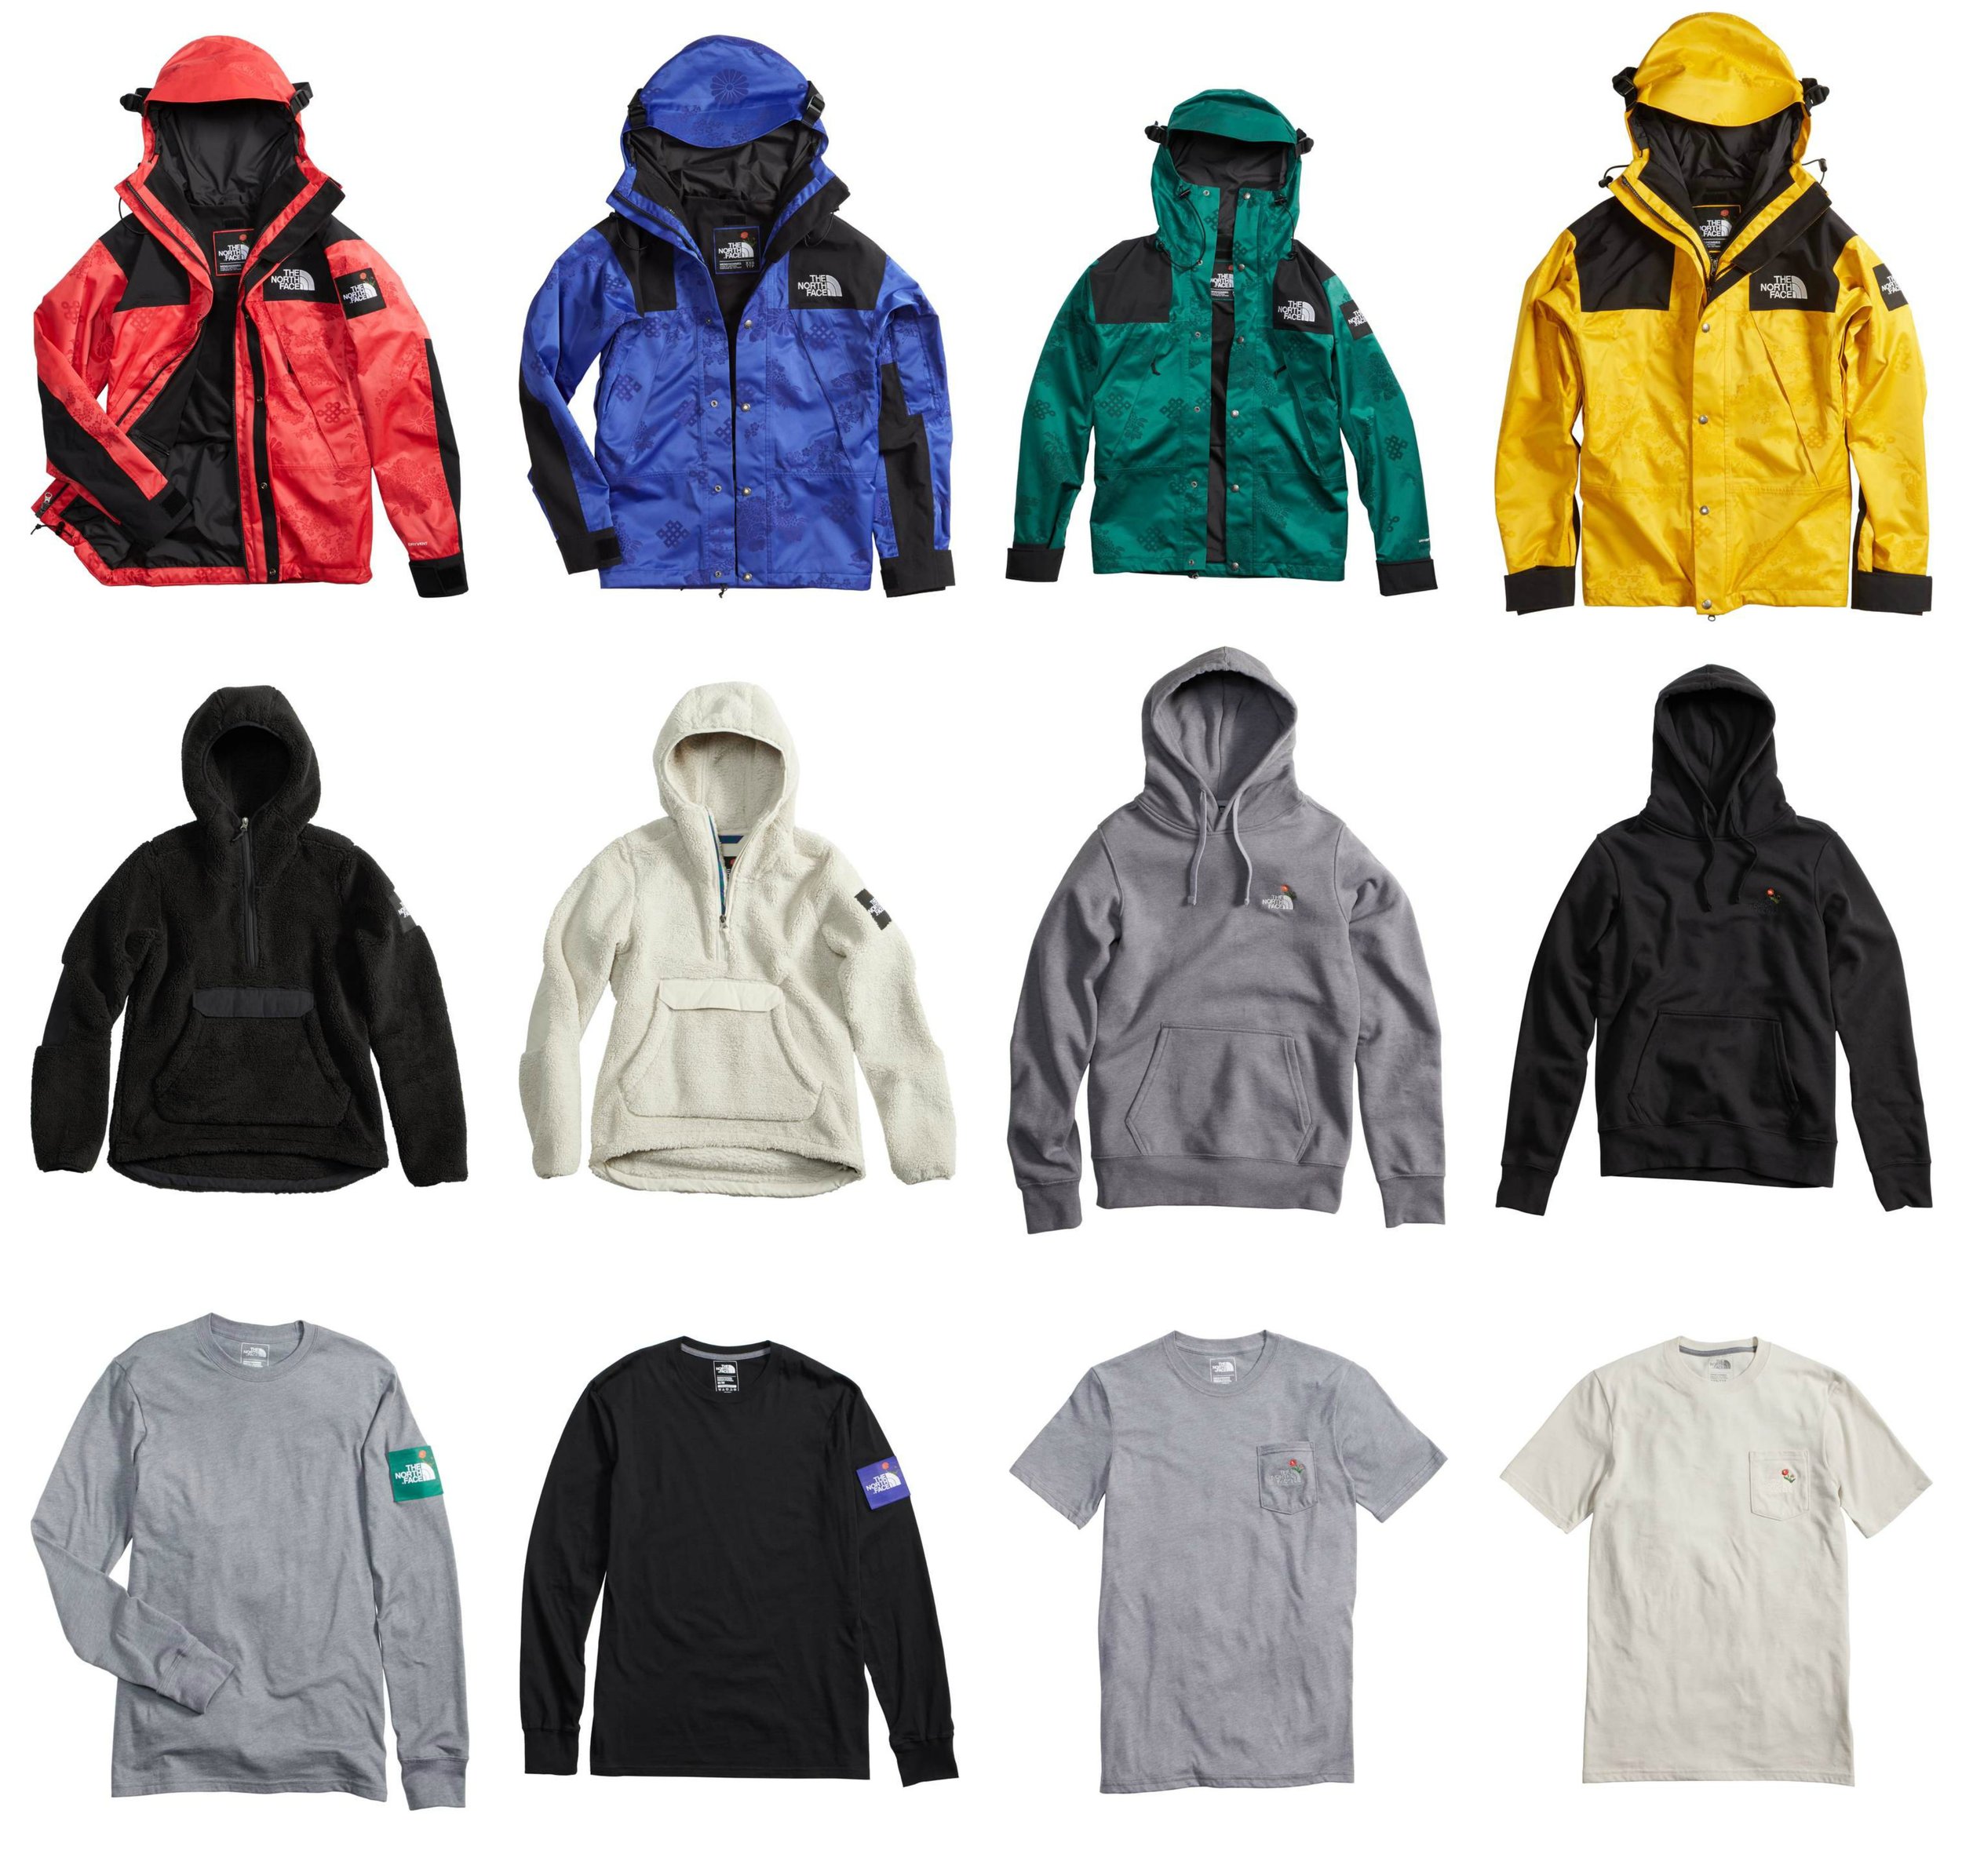 nordstrom x the north face